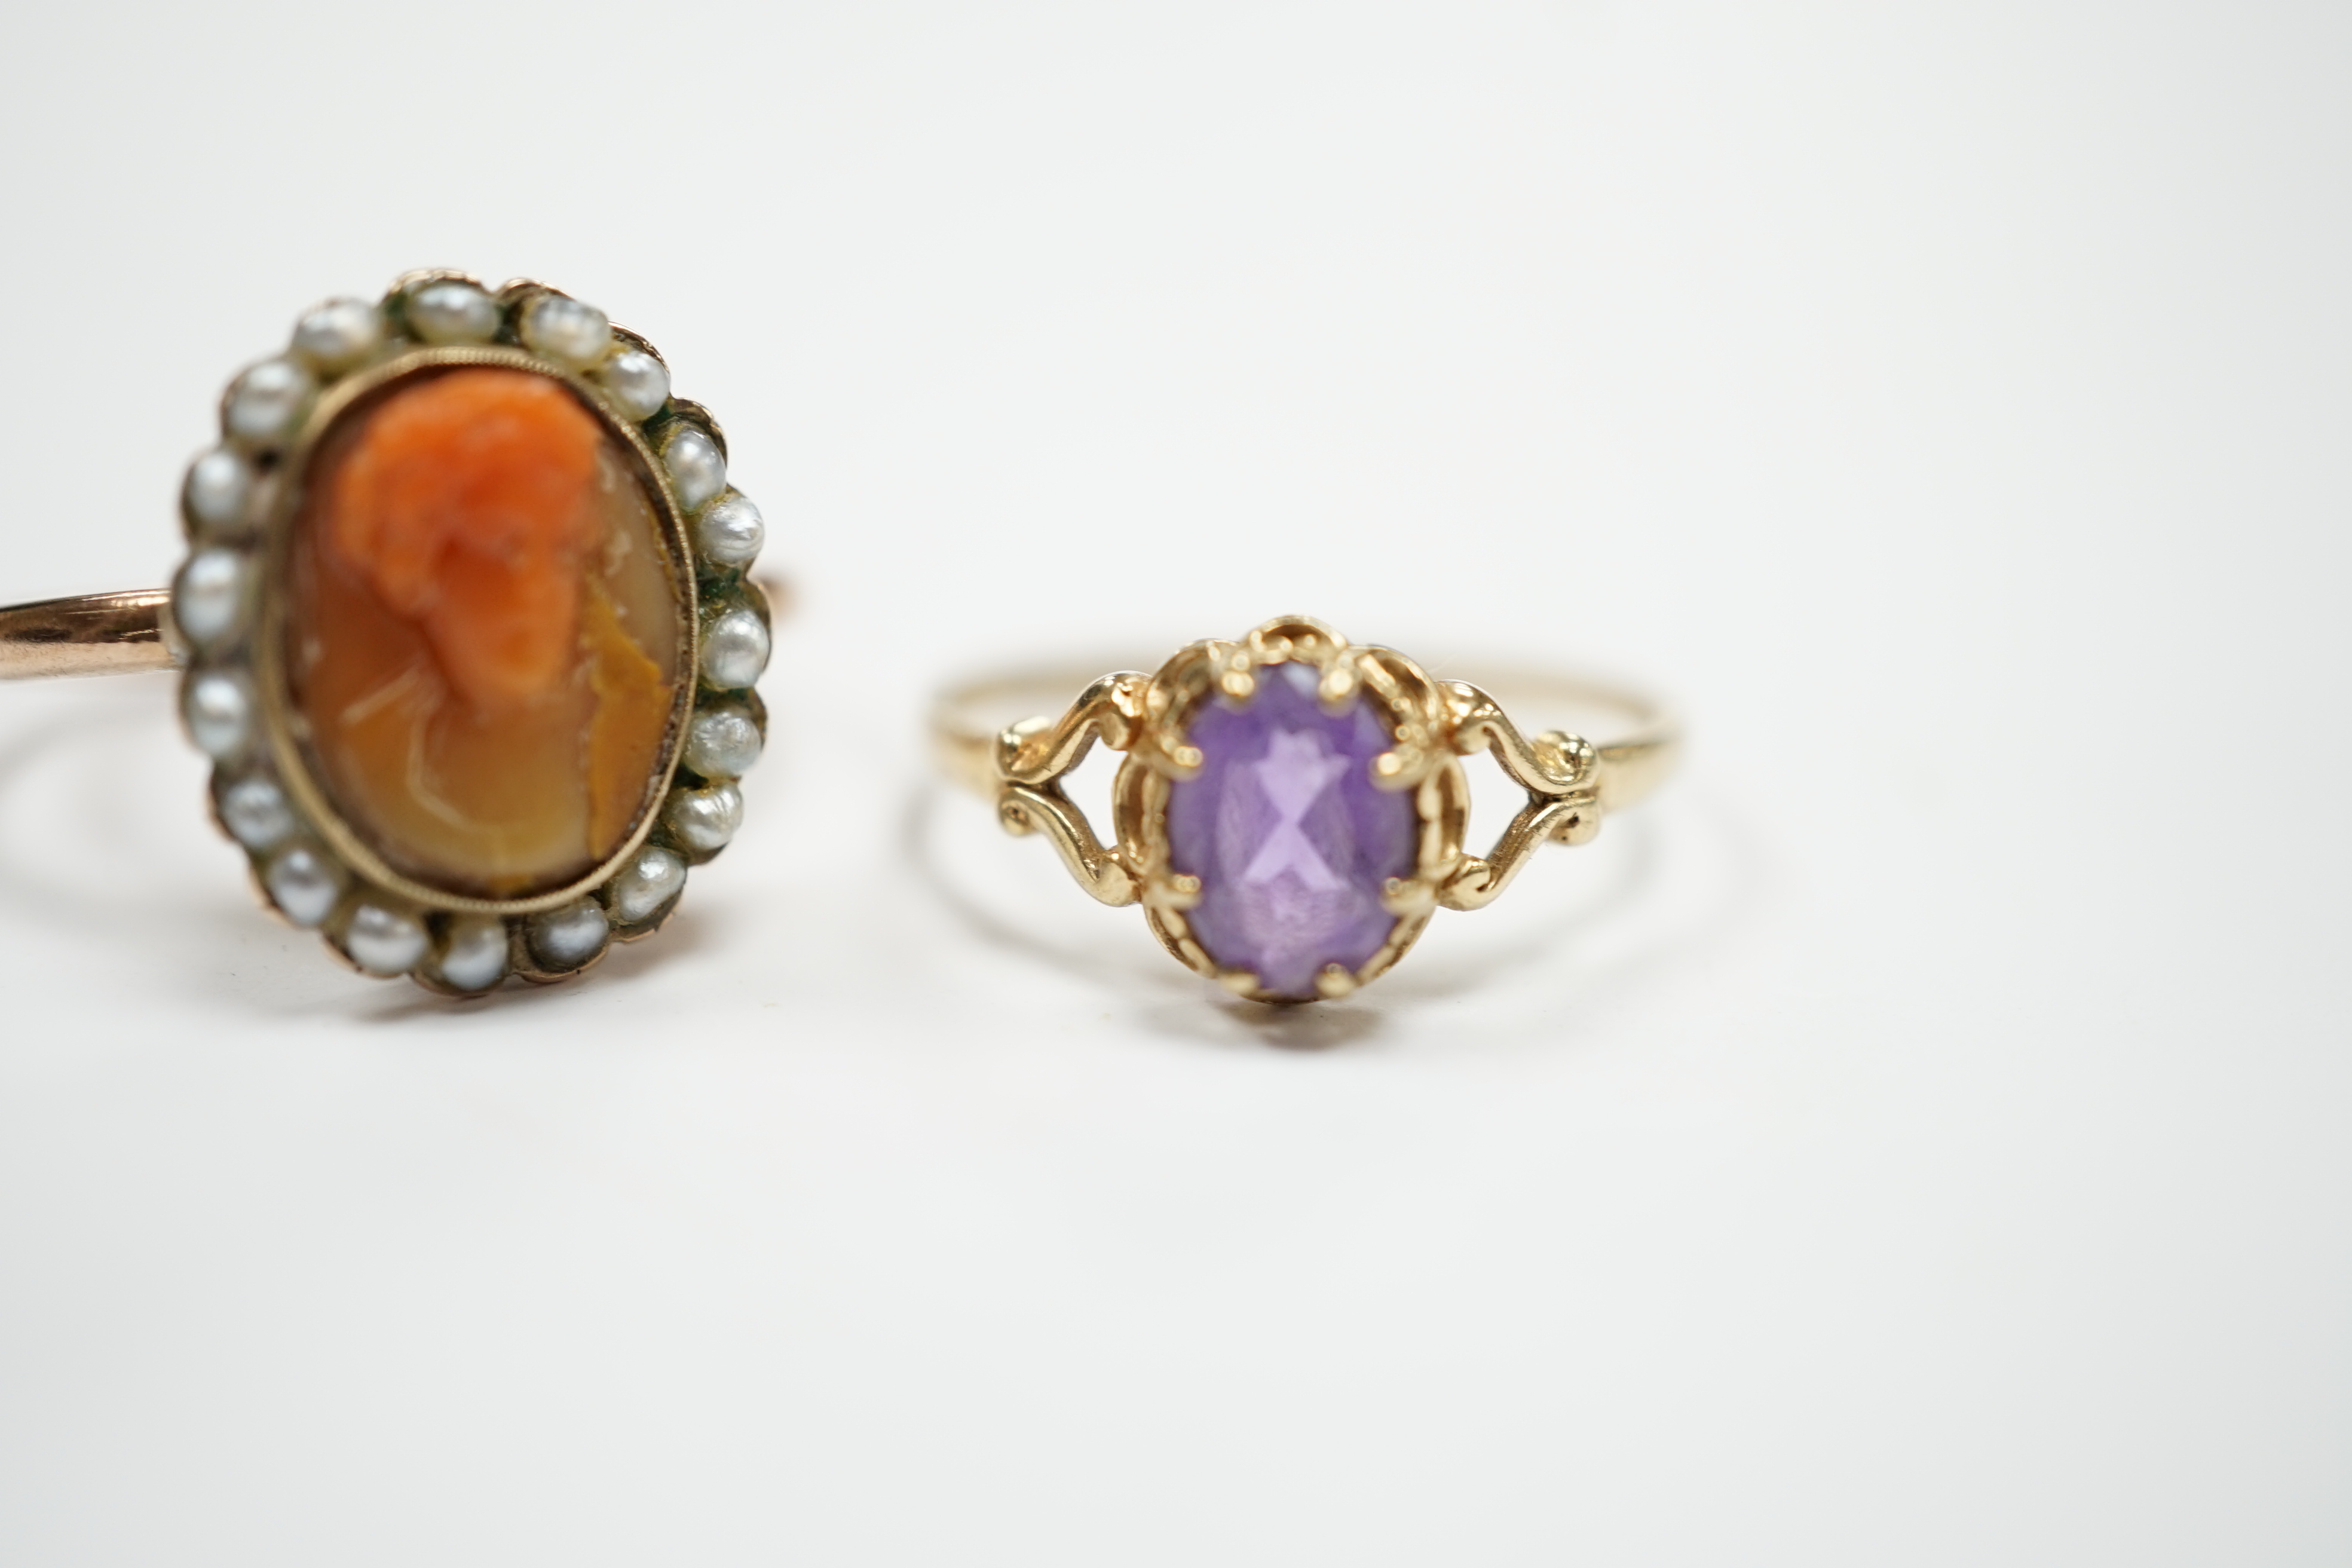 A modern 9ct gold and single stone amethyst set ring and a yellow metal, carved coral and split pearl set ring.